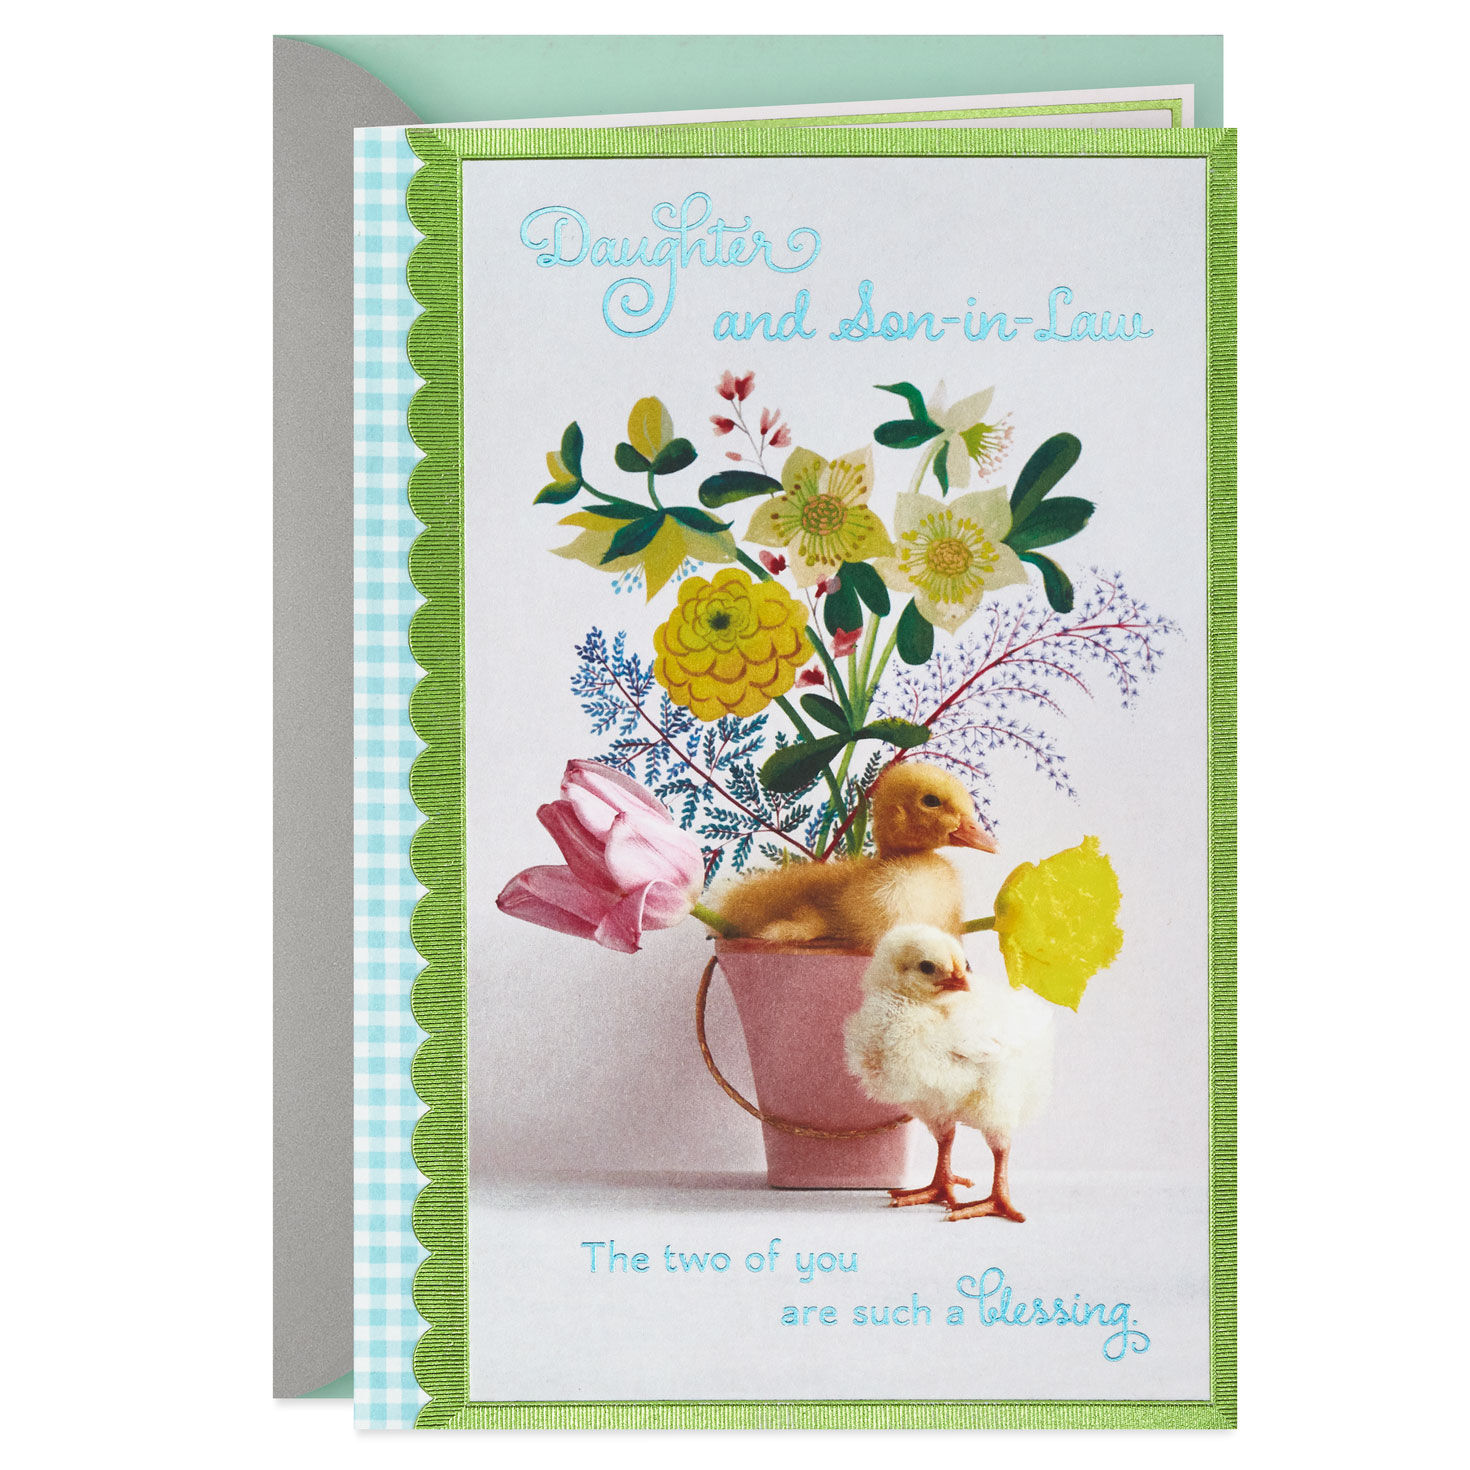 Details about   Hallmark Signature Collection Easter Greeting Card 